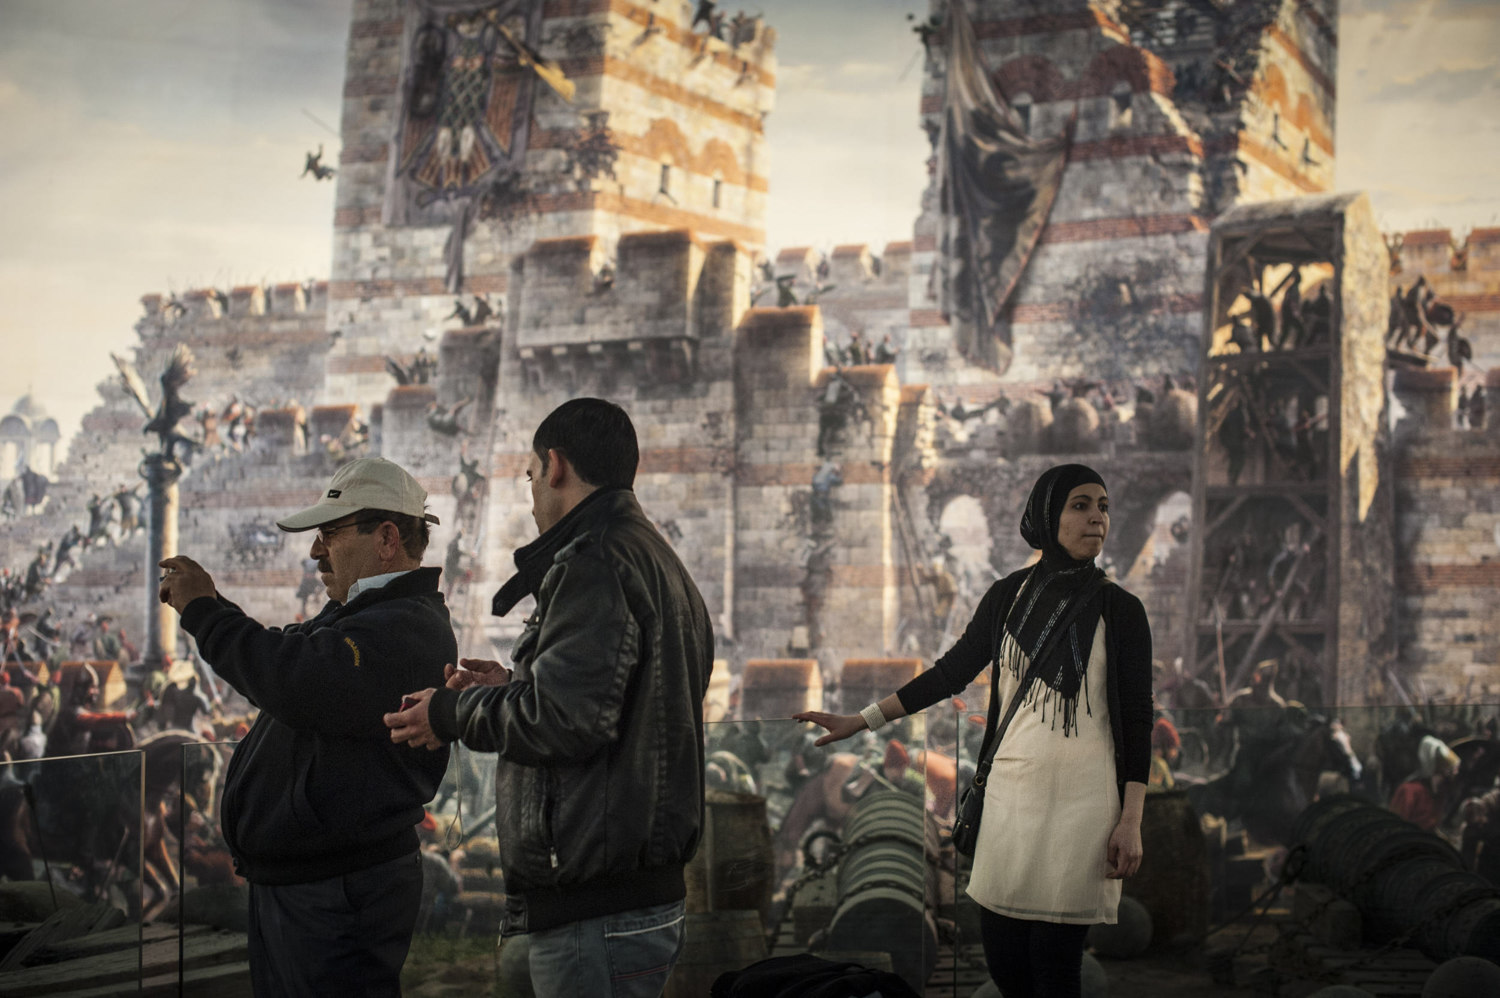  Visitors at the Istanbul Panorama relive the seige of 1453. There has been a reniossance of Ottoman culture in Turkey, and places like the Panorama and Ottoman television shows have become a popular way for Turks to connect with history. 